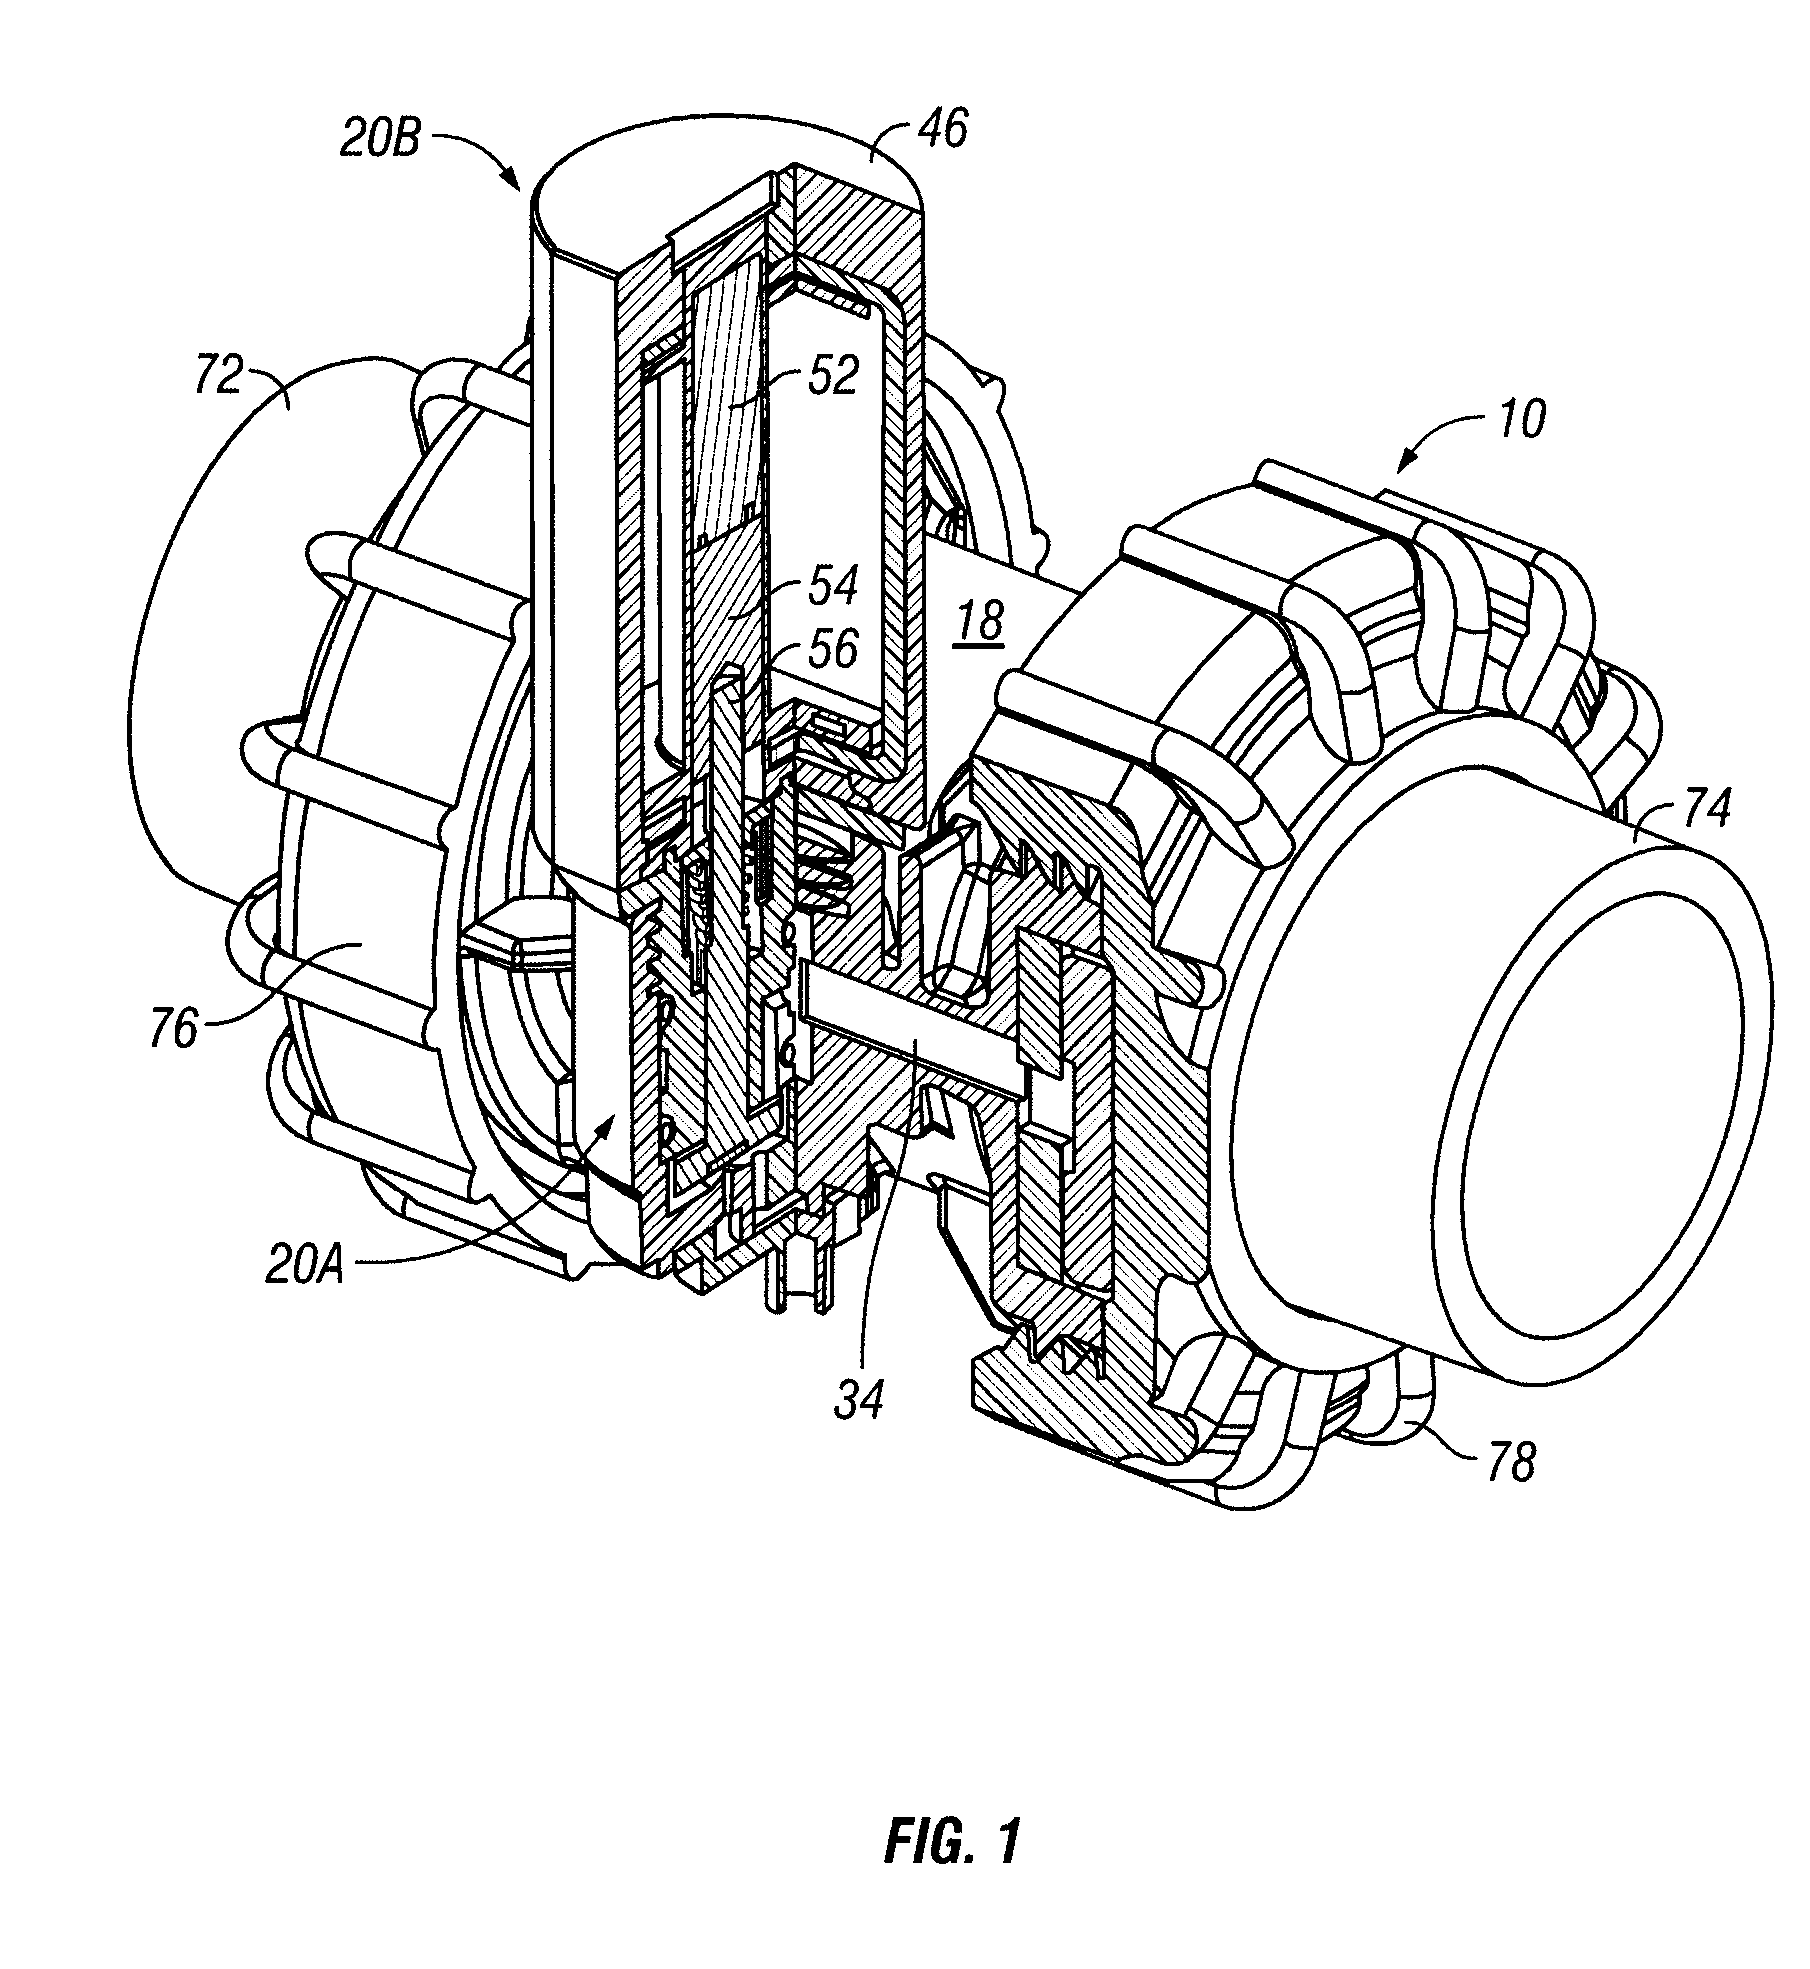 Solenoid Actuated Pilot Valve for Irrigation System Valve